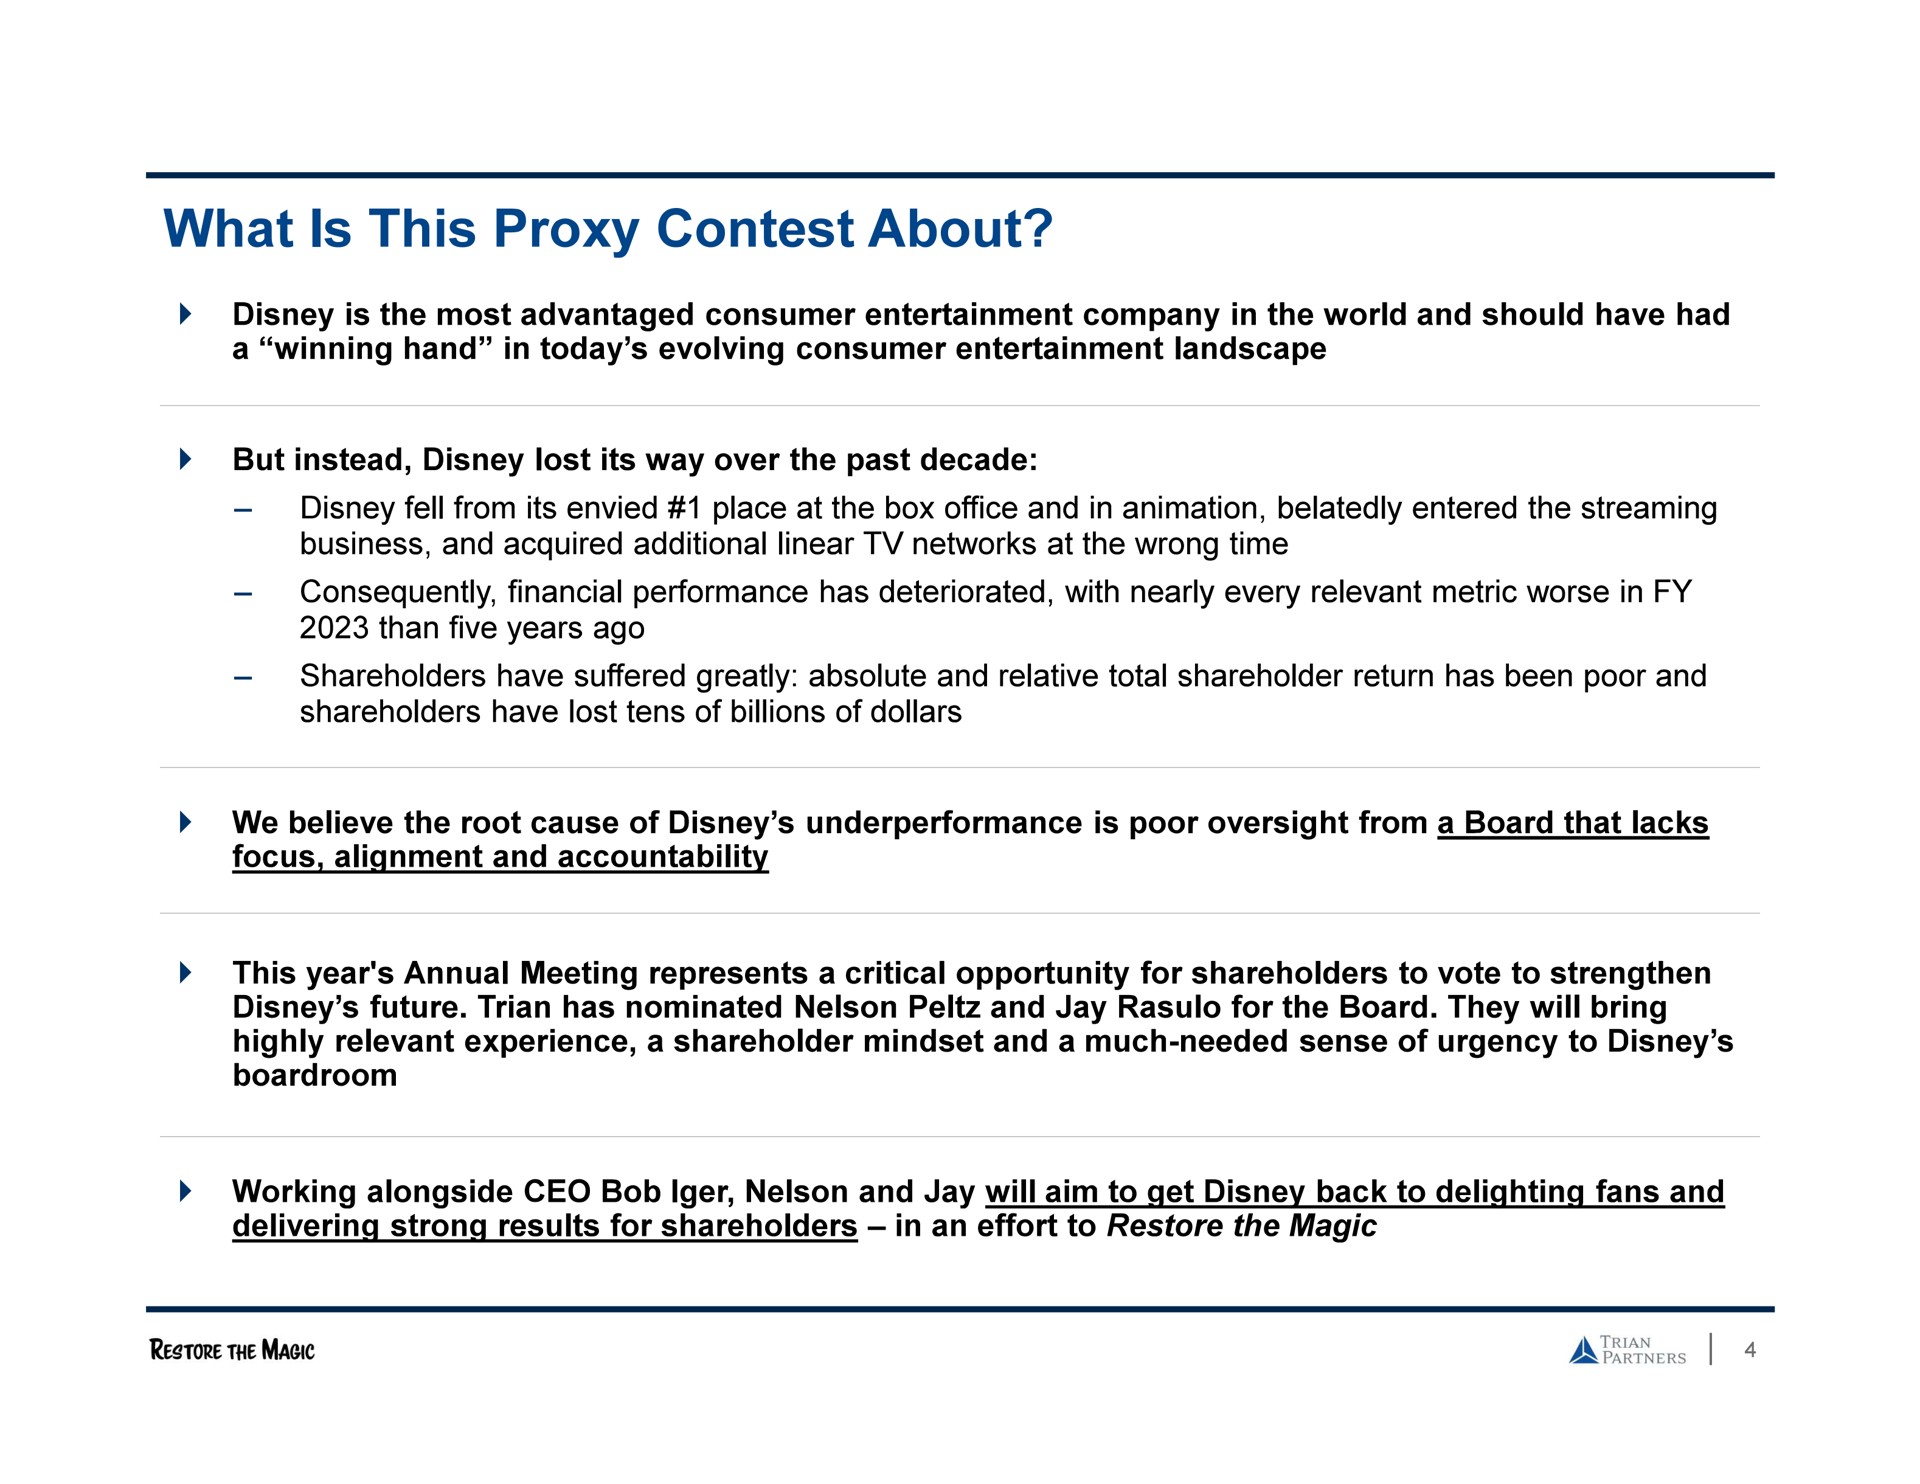 what is this proxy contest about | Trian Partners